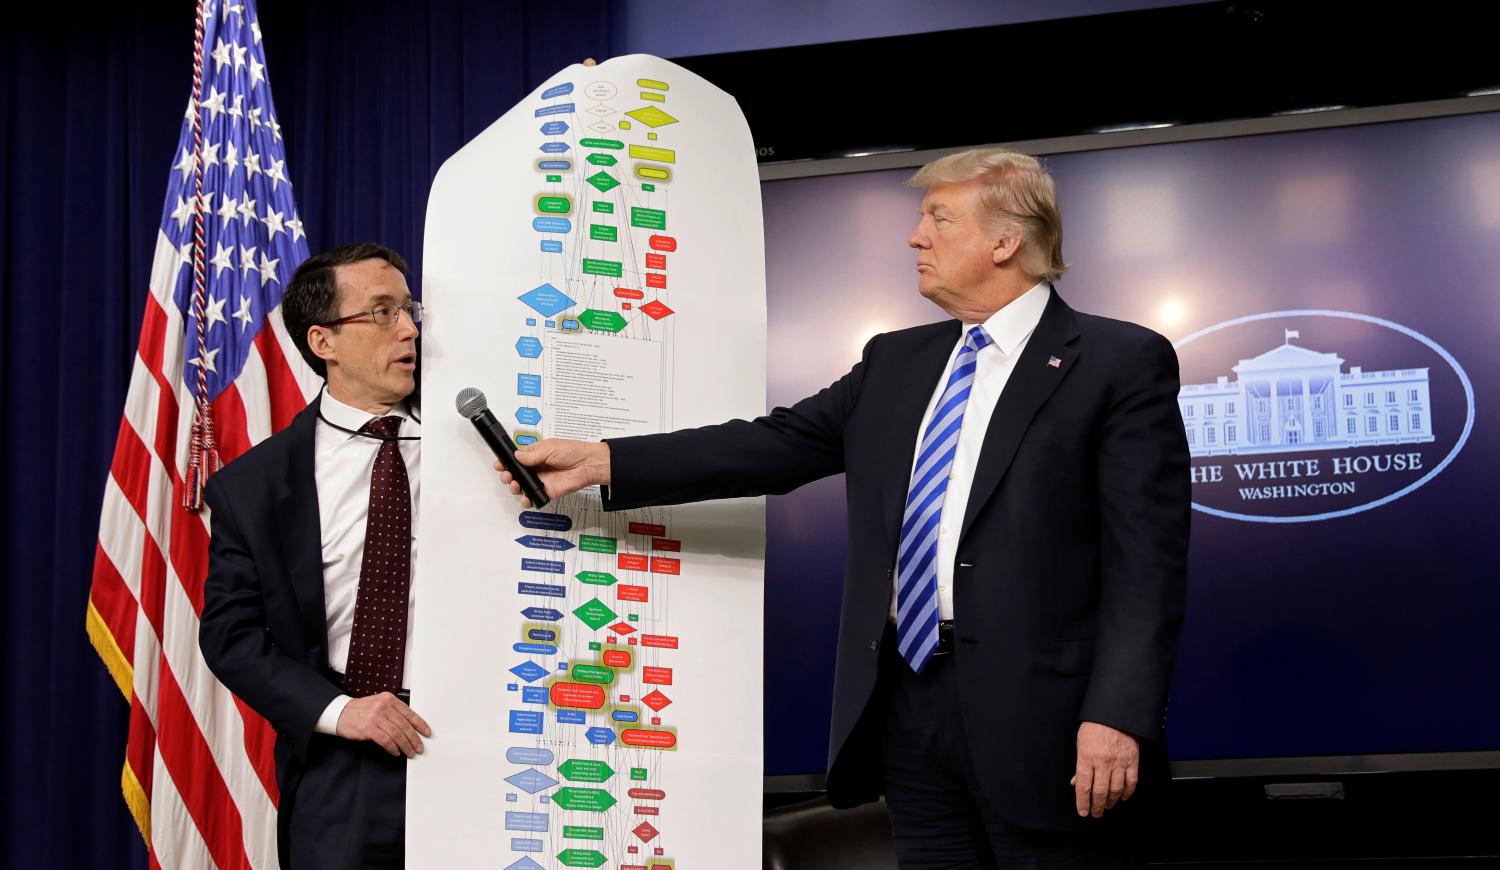 Special Assistant to the President for Infrastructure Policy DJ Gribbin (L) holds up a chart showing the regulatory steps to build a highway as U.S. President Donald Trump holds the mic during a CEO town hall on the American business climate at the Eisenhower Executive Office Building.